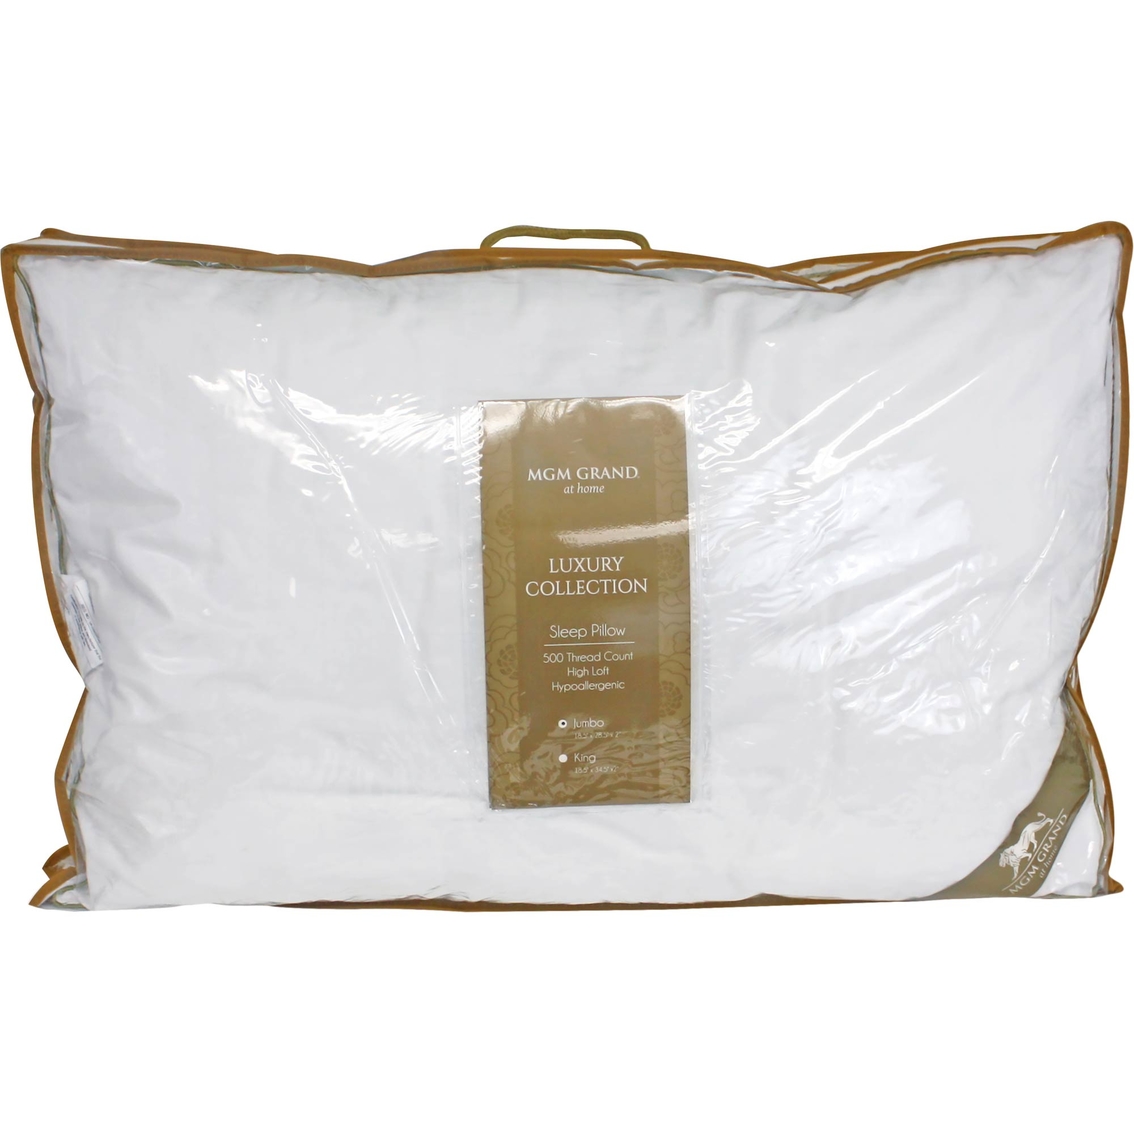 MGM Grand at Home Luxury Hotel Pillow - Image 3 of 4